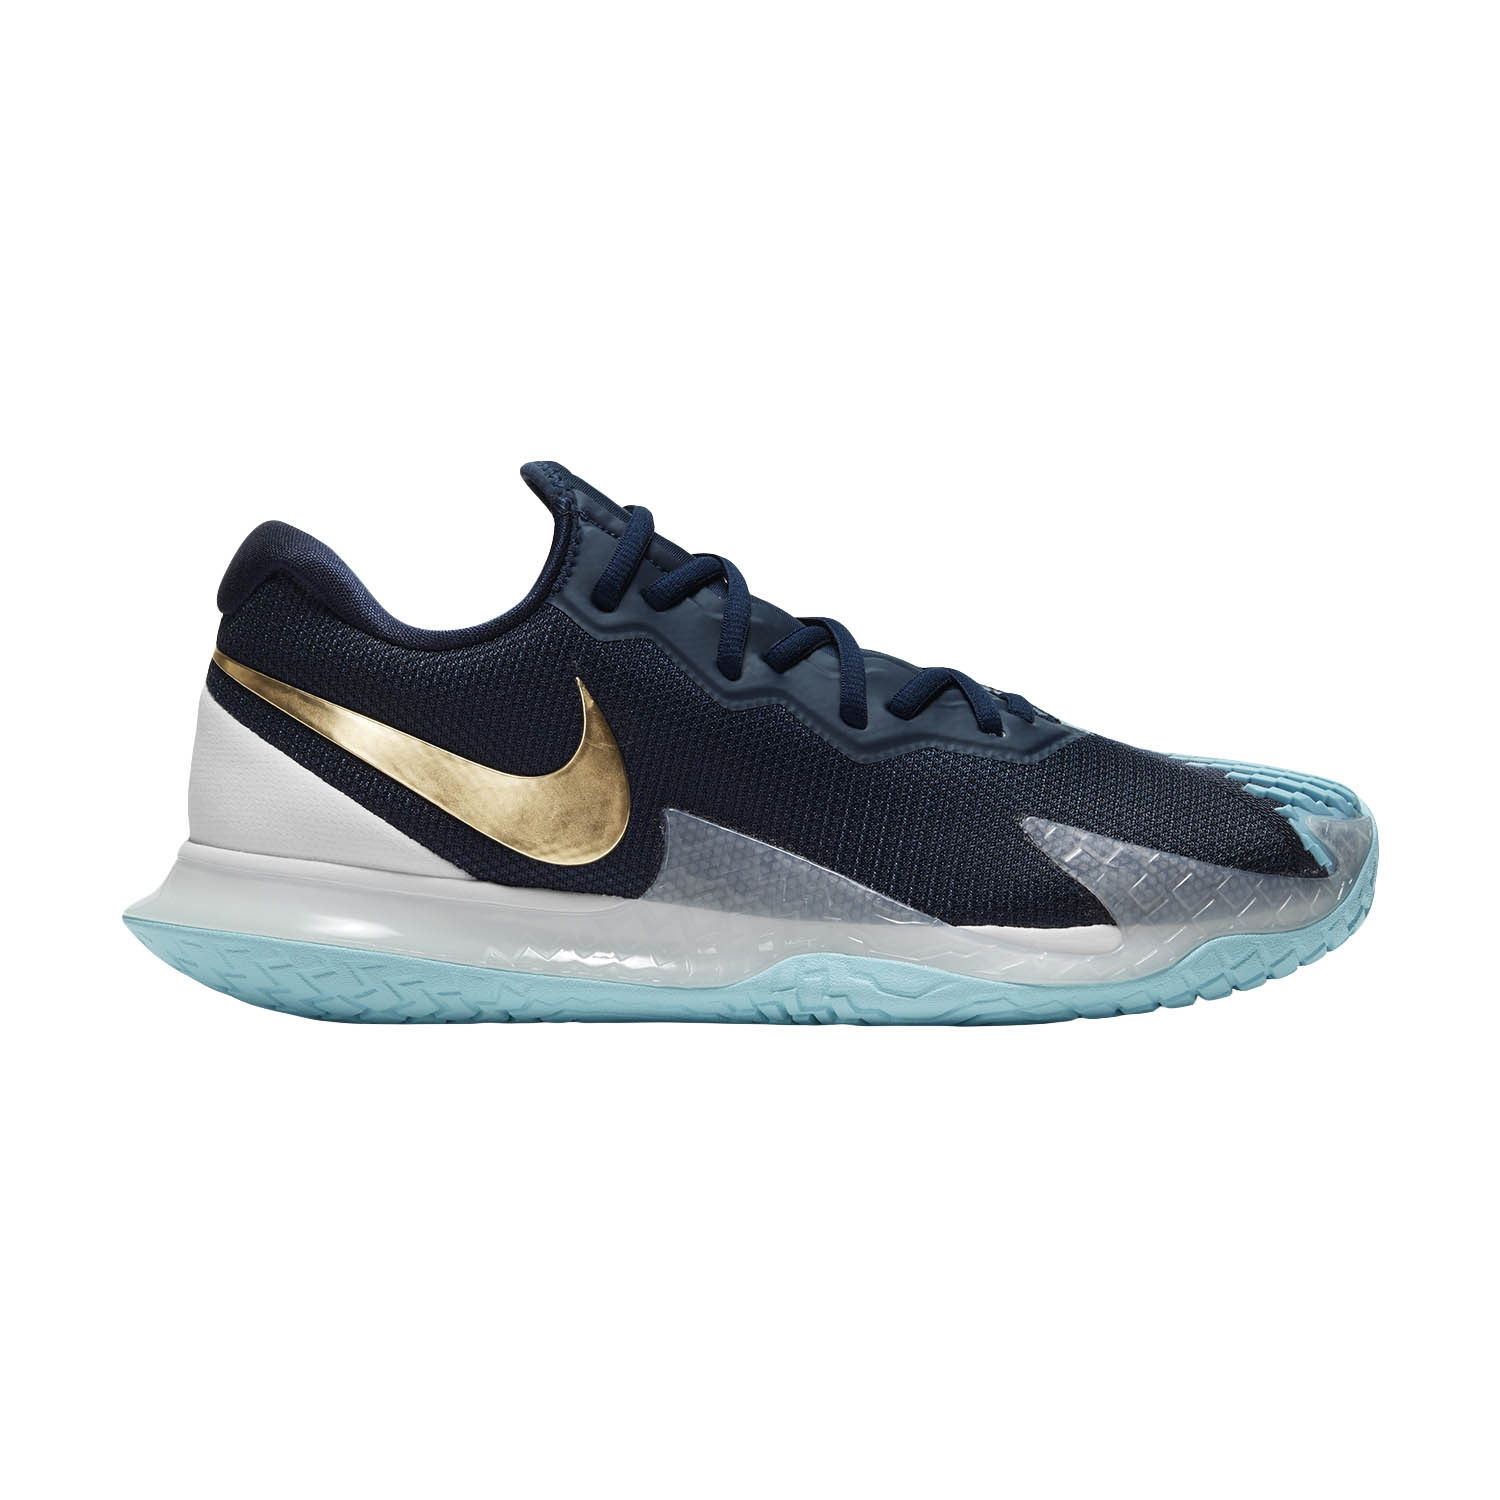 white and gold nike tennis shoes